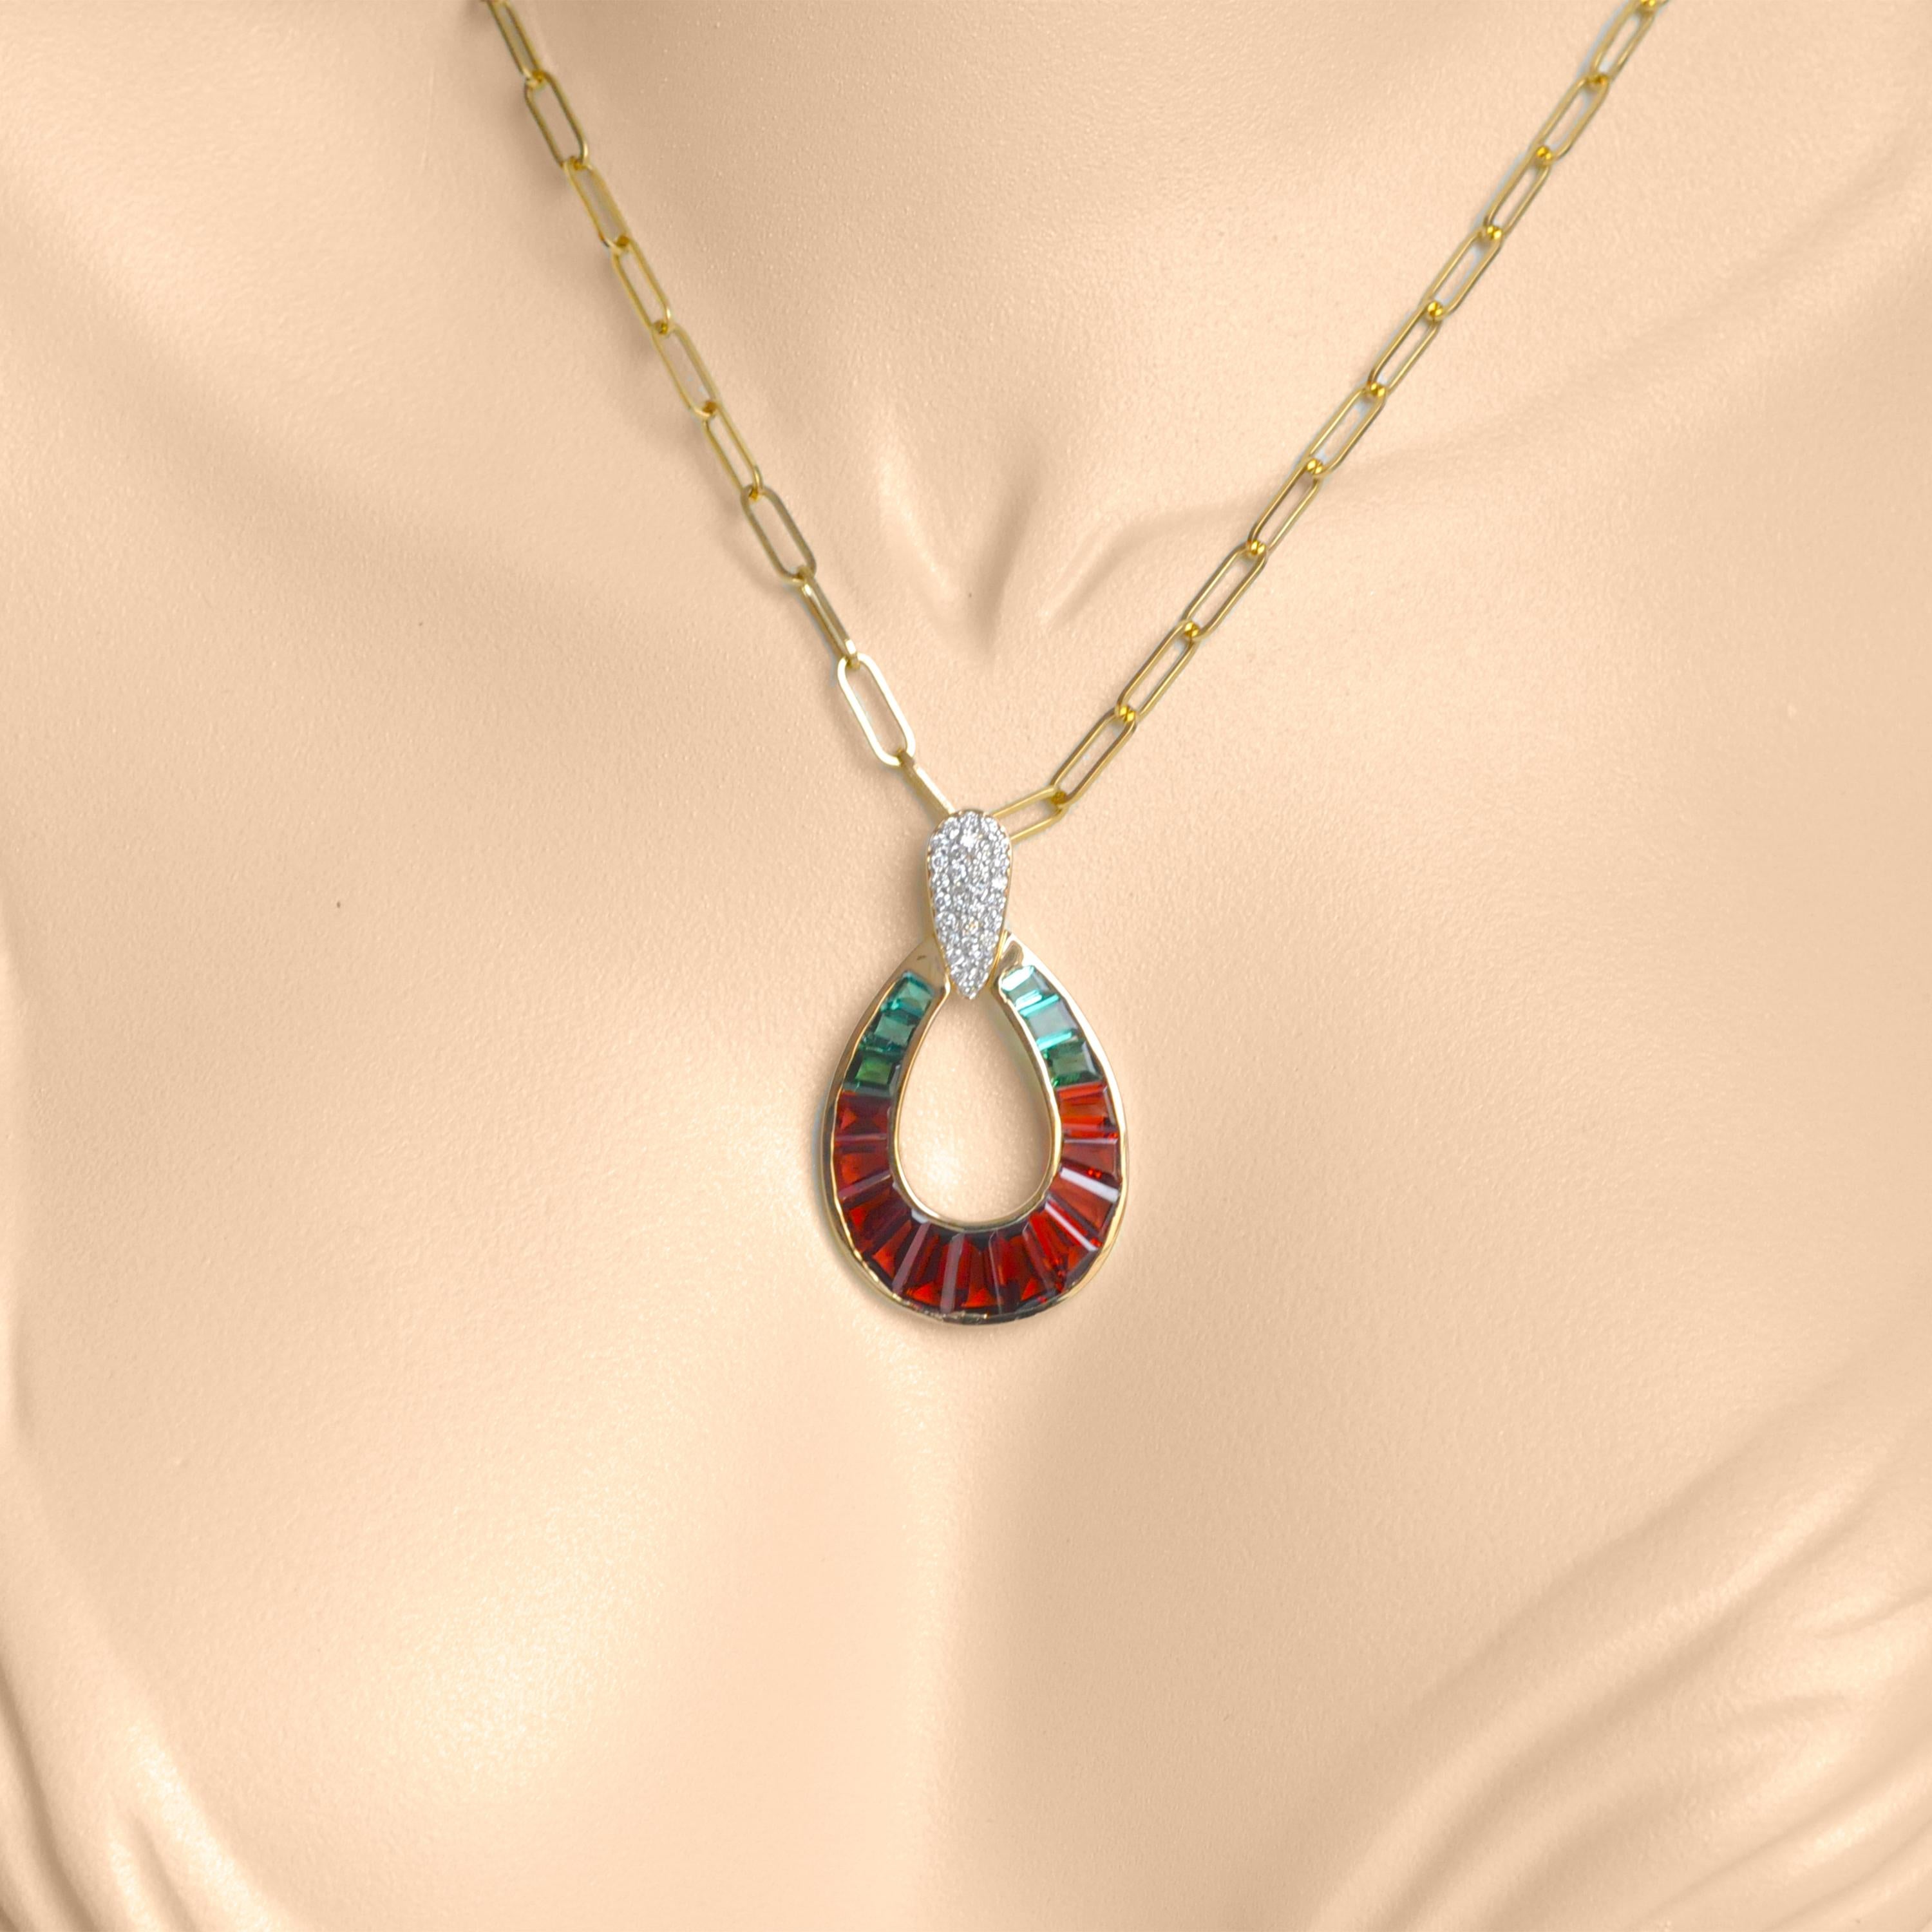 18k gold garnet green tourmaline diamond raindrop pendant

Experience enchantment with our 18K Gold Garnet Green Tourmaline Diamond Raindrop Pendant. Meticulously crafted, it seamlessly blends elegance and sophistication.

Artisans designed the